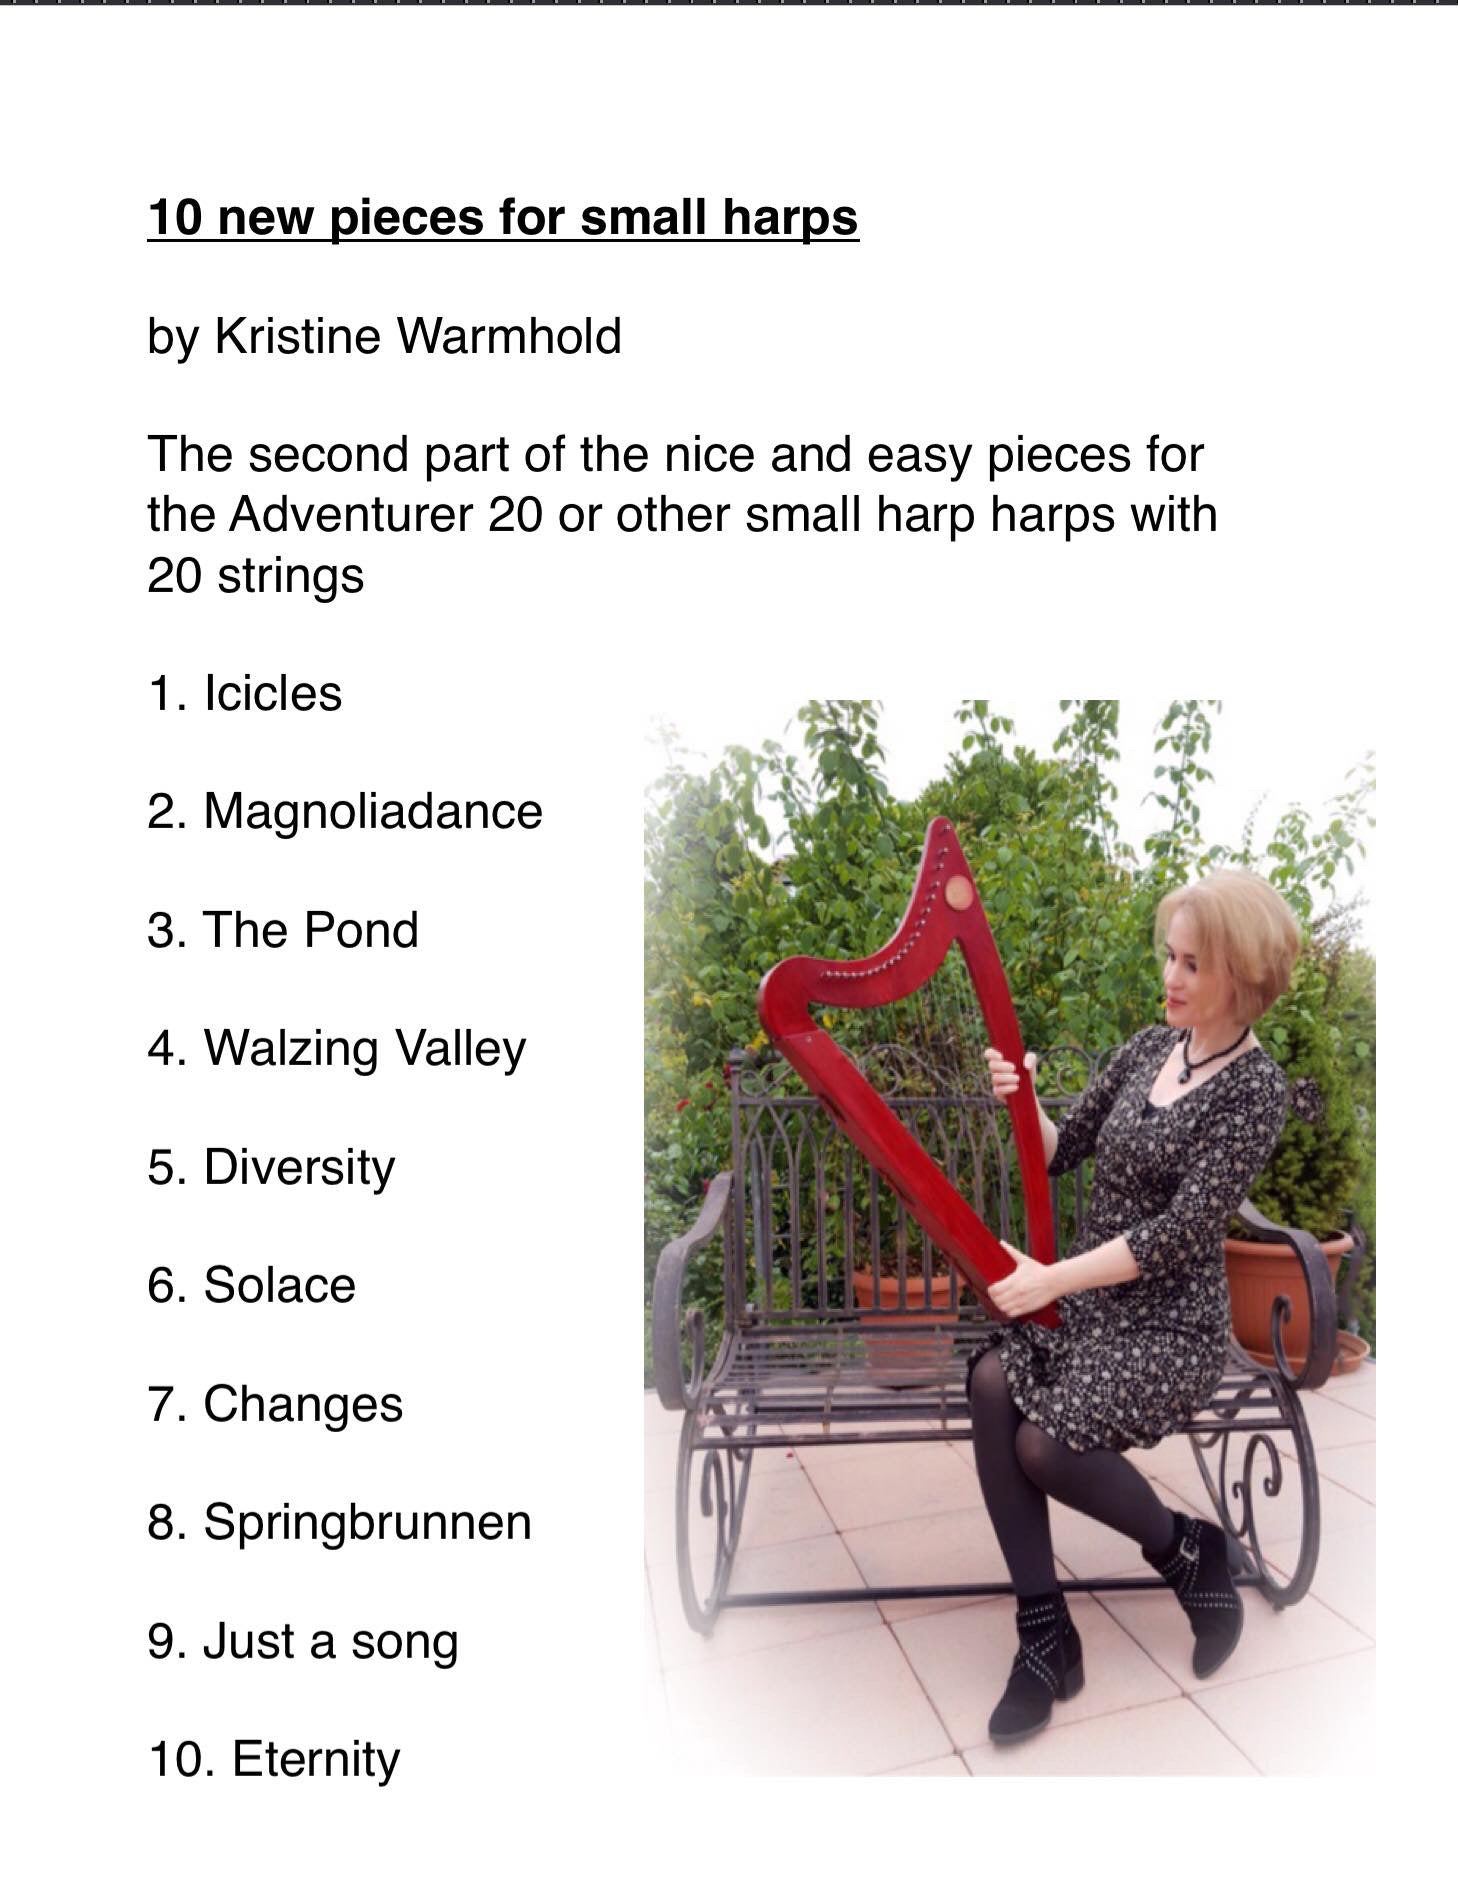 10 Pieces for the Adventurer 20  vol 2 by Kristine Warmhold